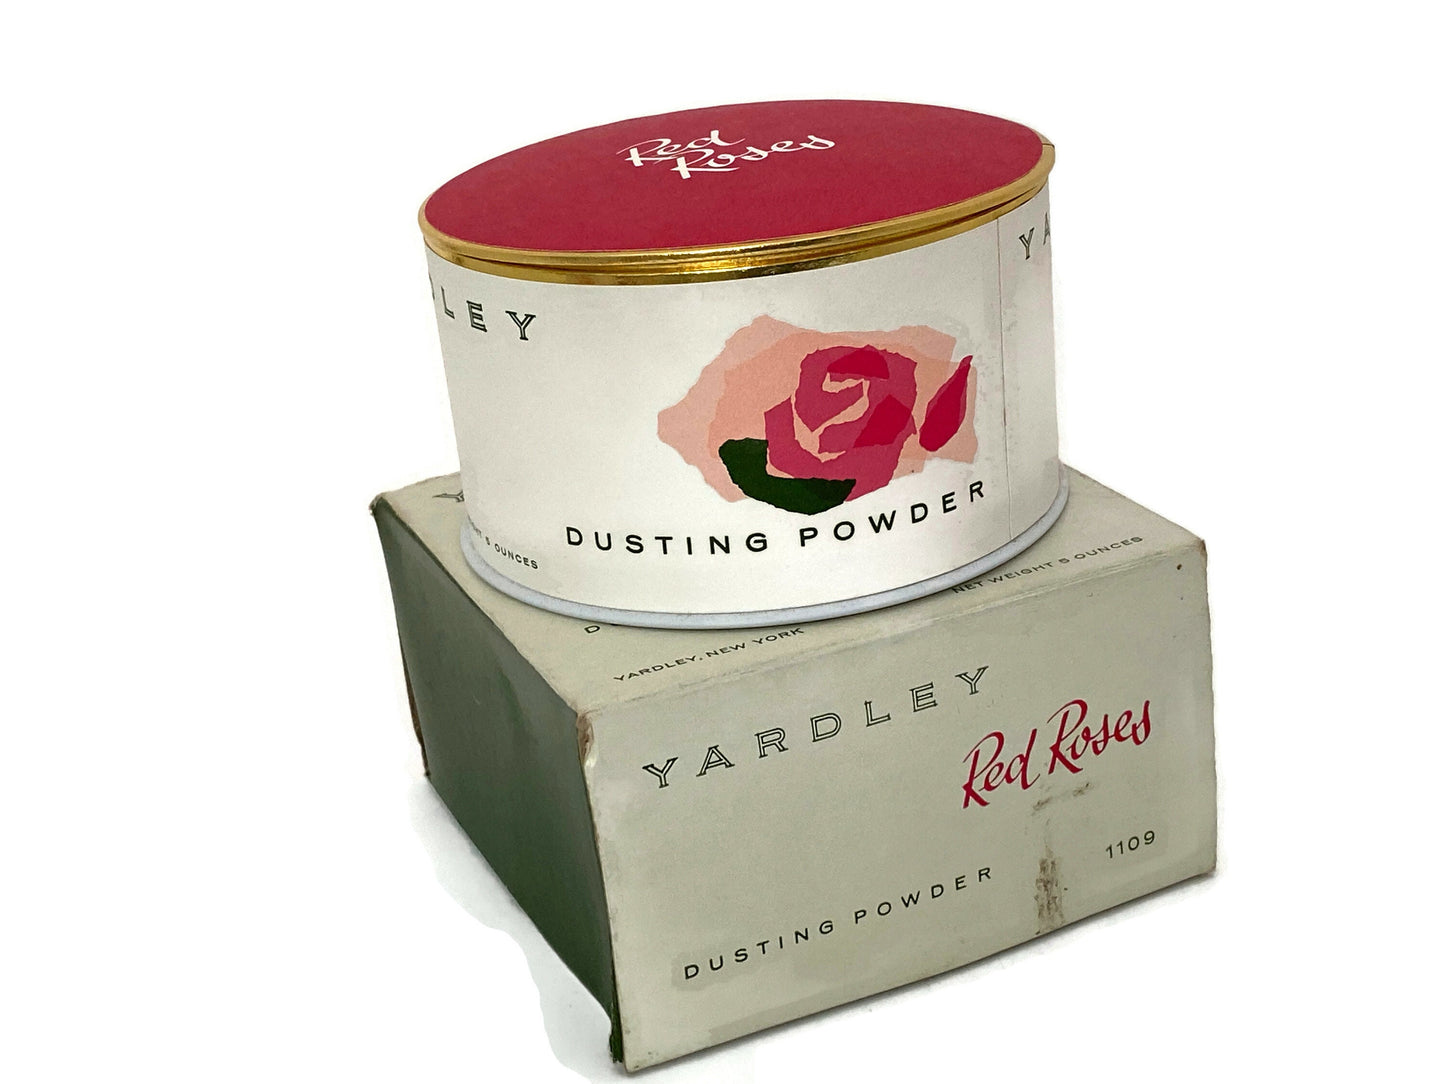 Vintage Red Roses Dusting Powder from Yardley